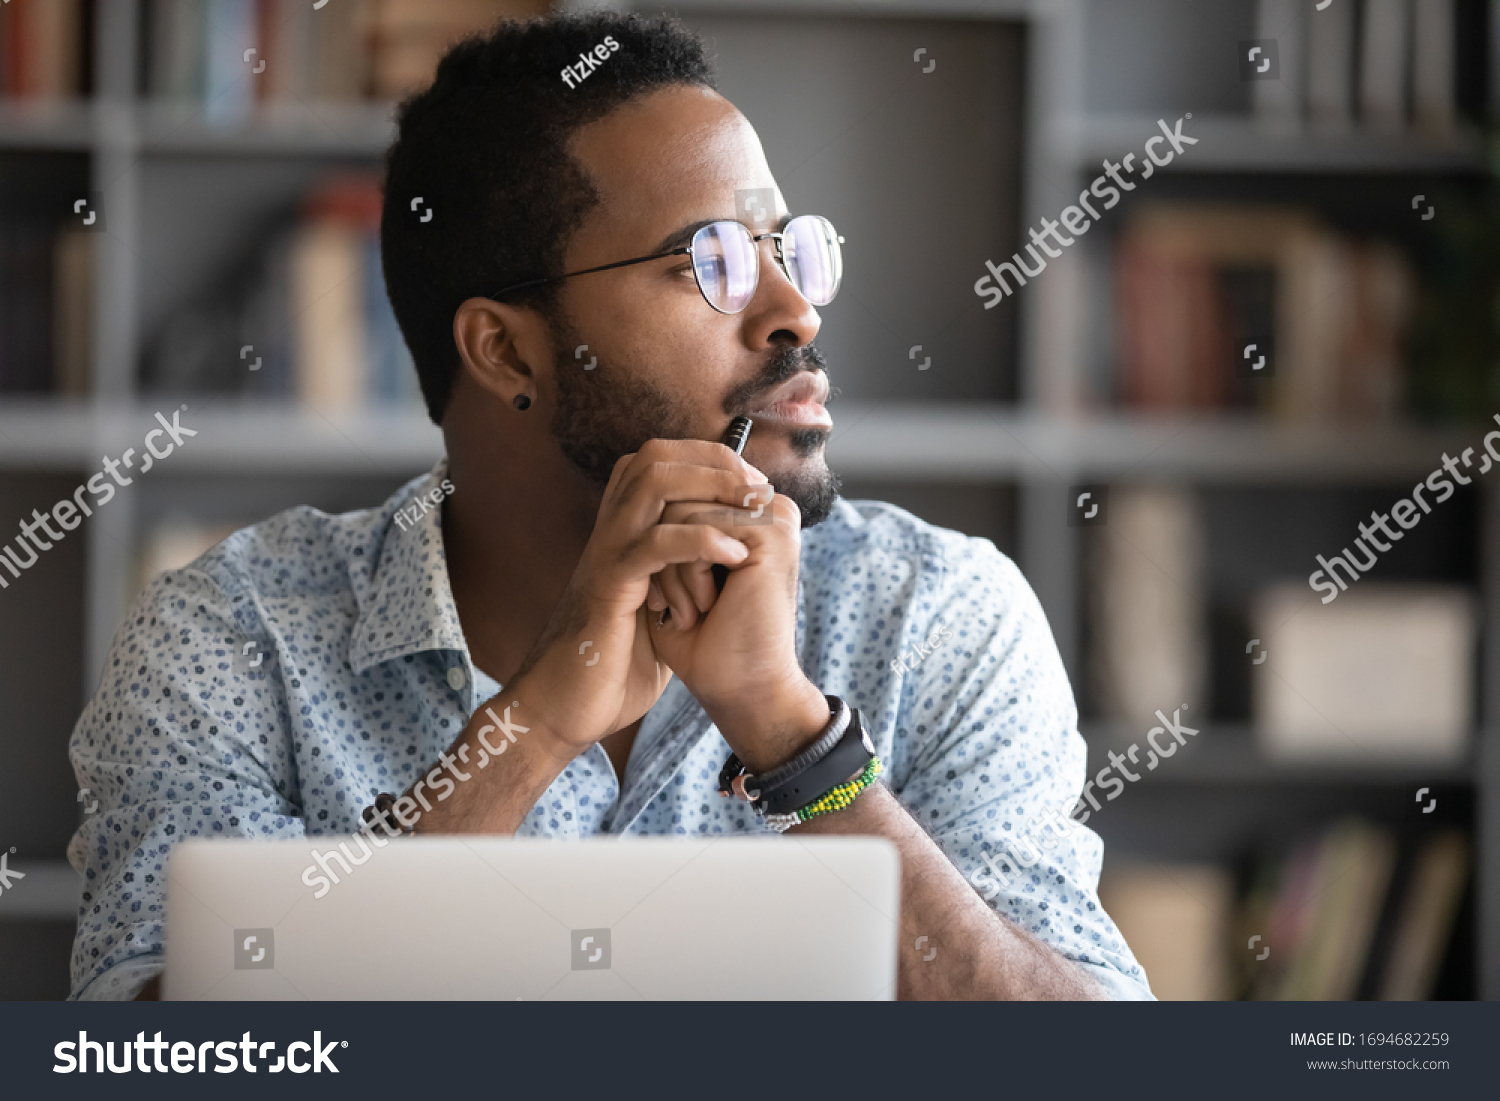 Pensive African American man in glasses distracted from computer work look in distance thinking or pondering, thoughtful biracial male lost in thoughts make plans visualizing, business vision concept #1694682259